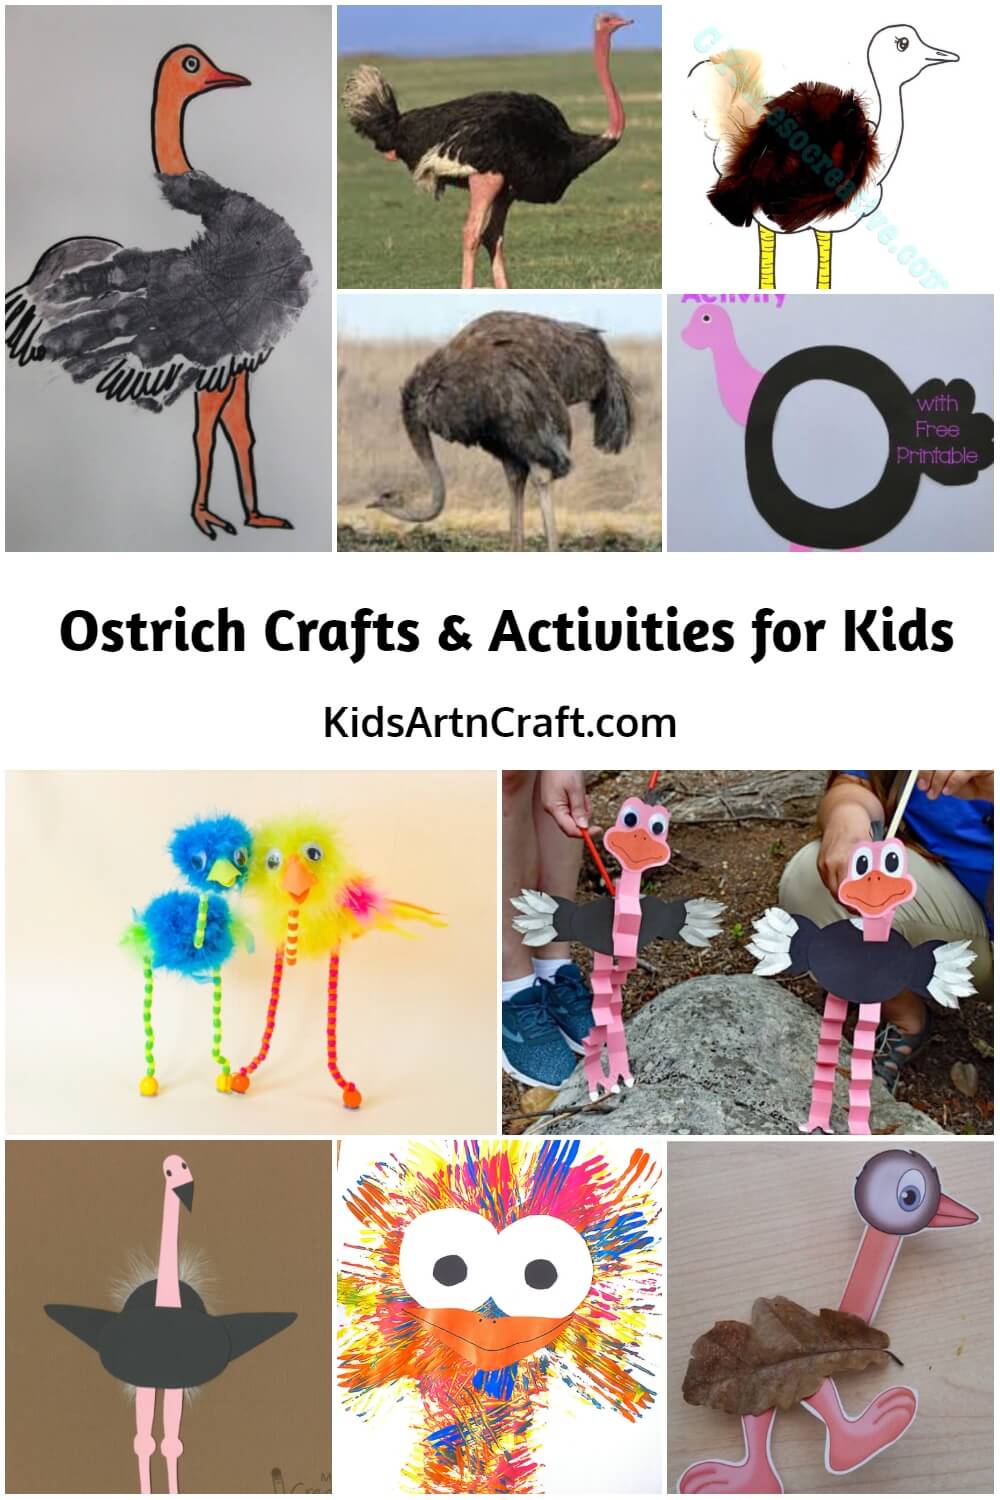 Ostrich Crafts & Activities for Kids